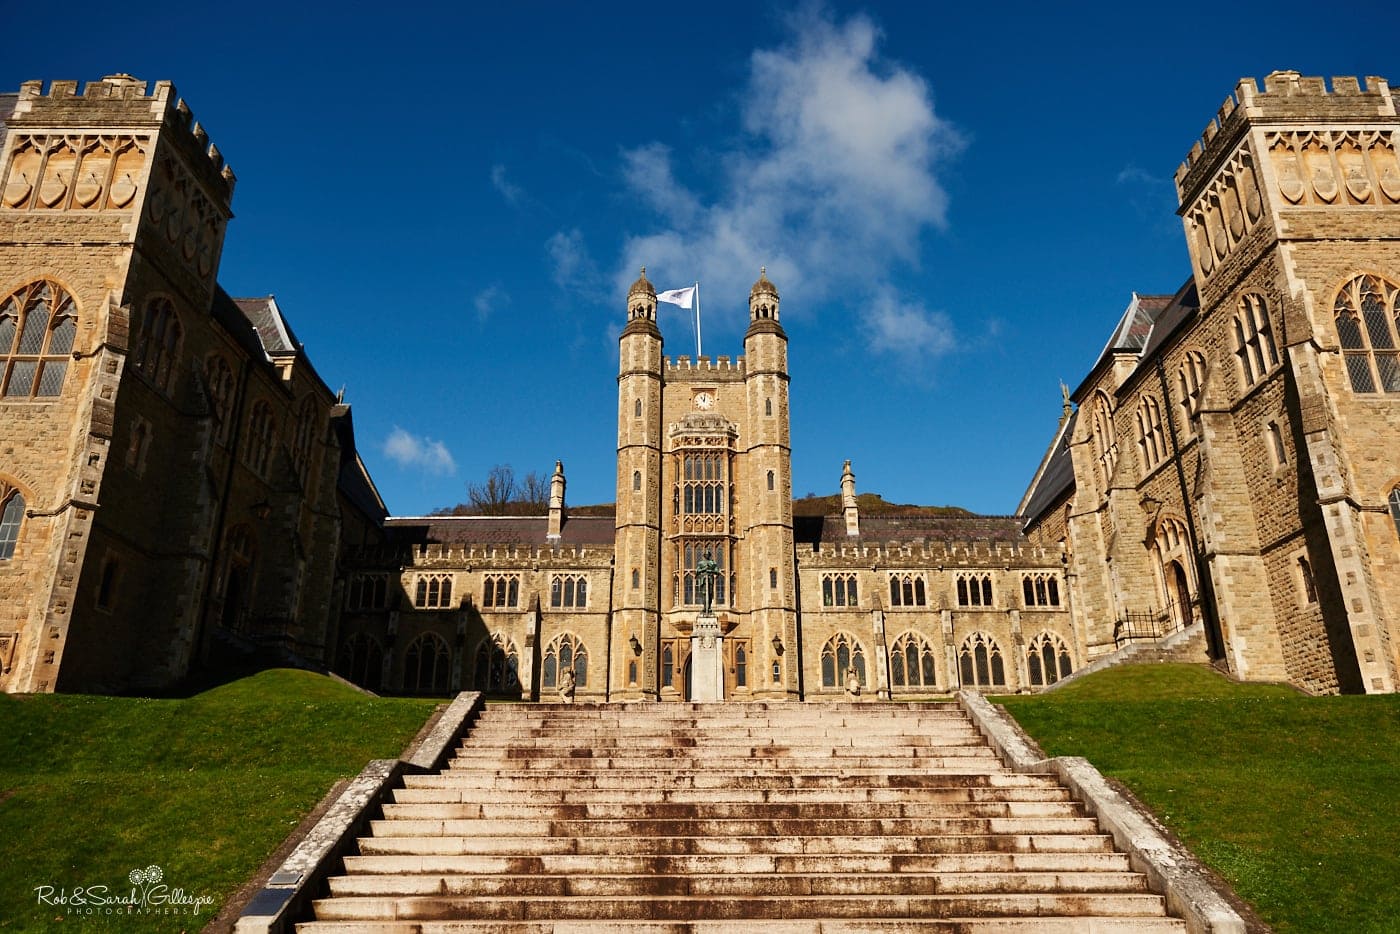 Front view of Malvern College with steps leading up